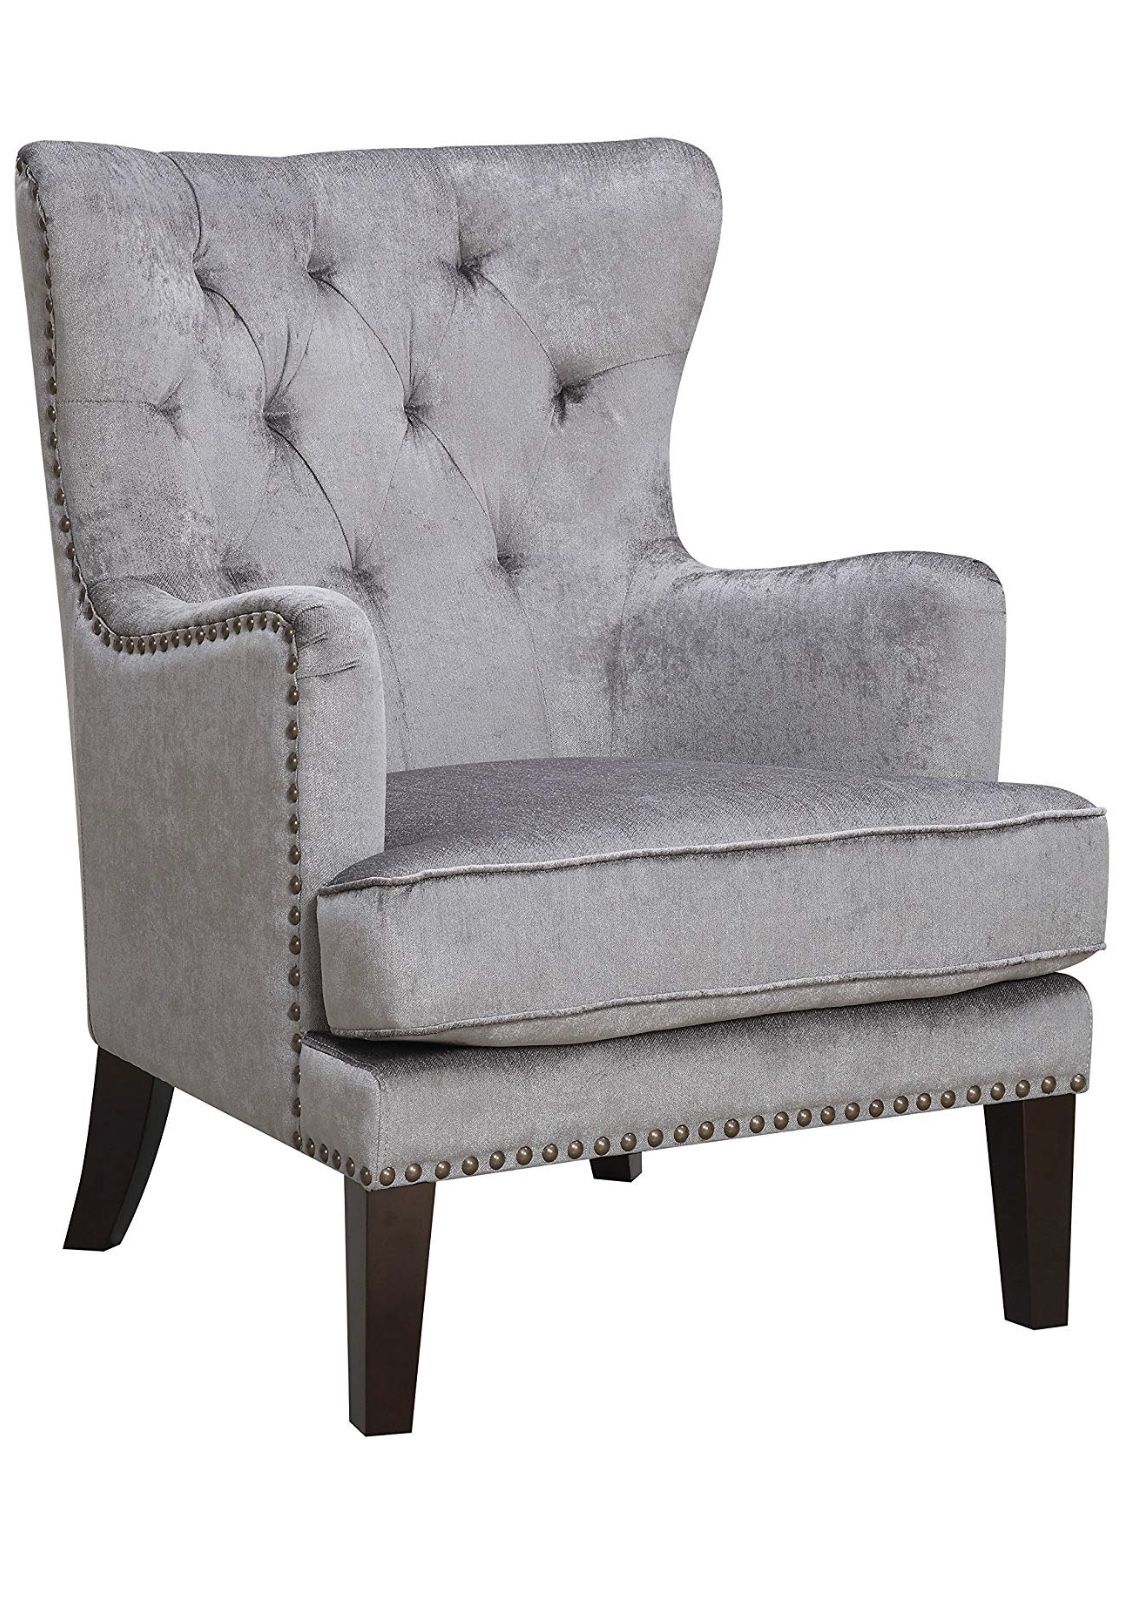 Gray wingback accent chair